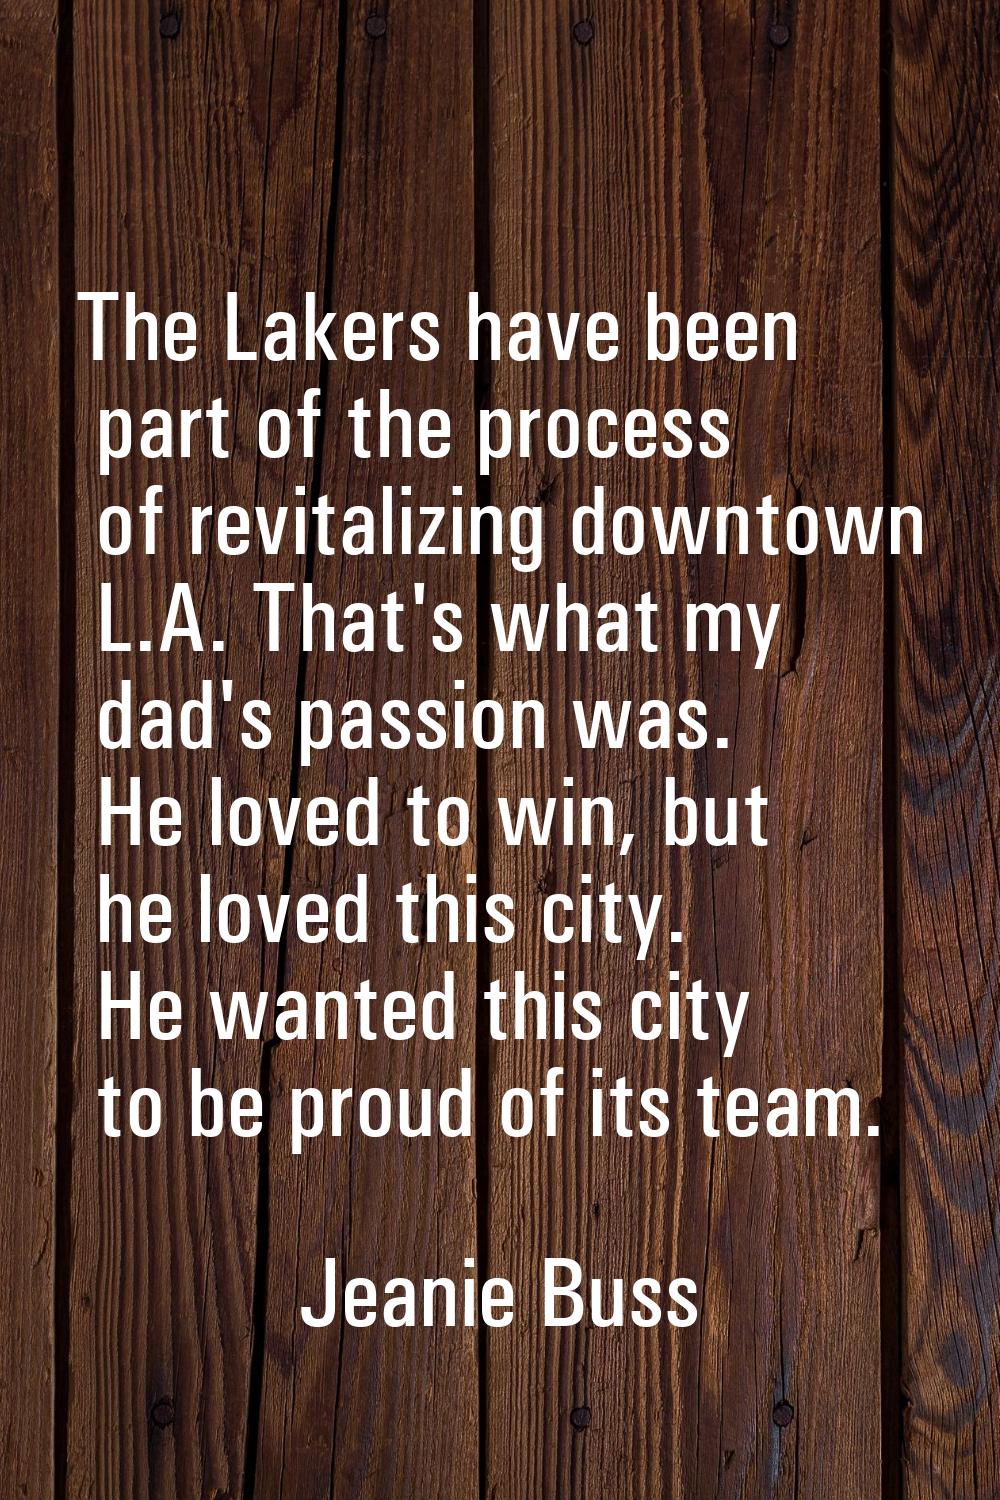 The Lakers have been part of the process of revitalizing downtown L.A. That's what my dad's passion